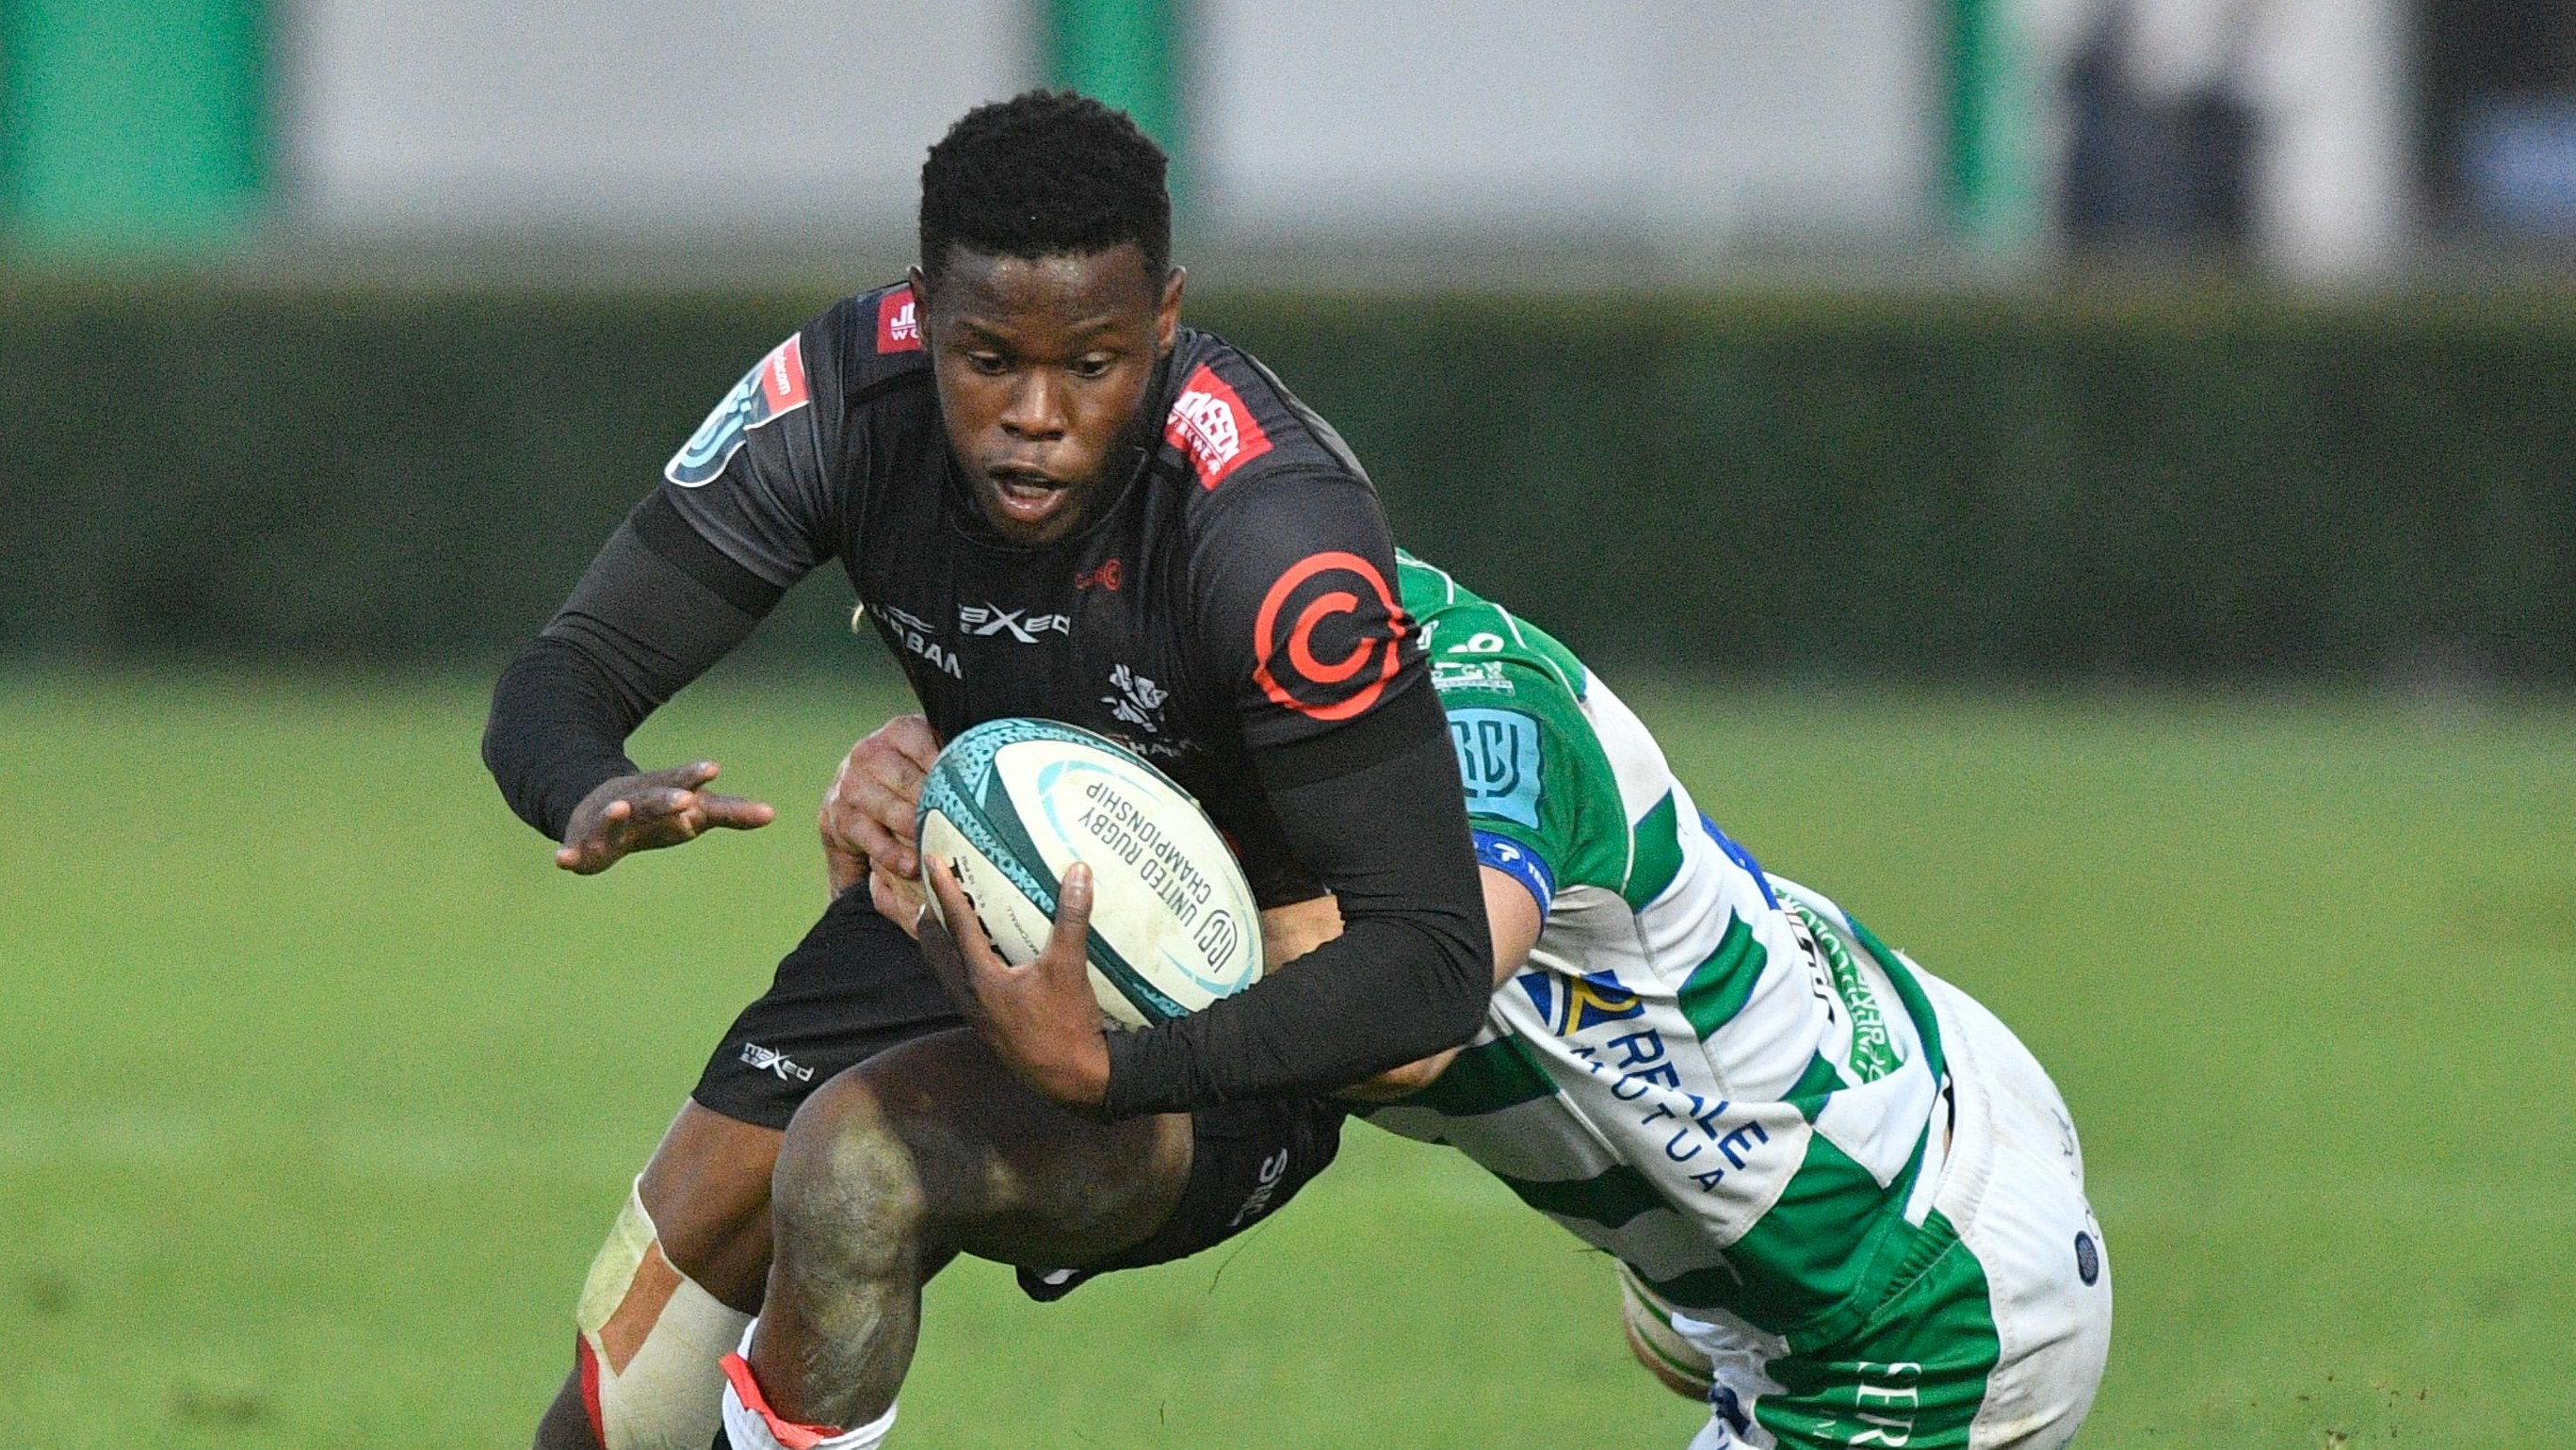 Mandatory Credit: Photo by Luca Sighniolfi/INPHO/Shutterstock/BackpagePix (12824431aj) Benetton Rugby vs Cell C Sharks. Sharks' Aphelele Fassi and Lorenzo Cannone of Benetton United Rugby Championship, Stadio Monigo, Treviso, Italy - 26 Feb 2022